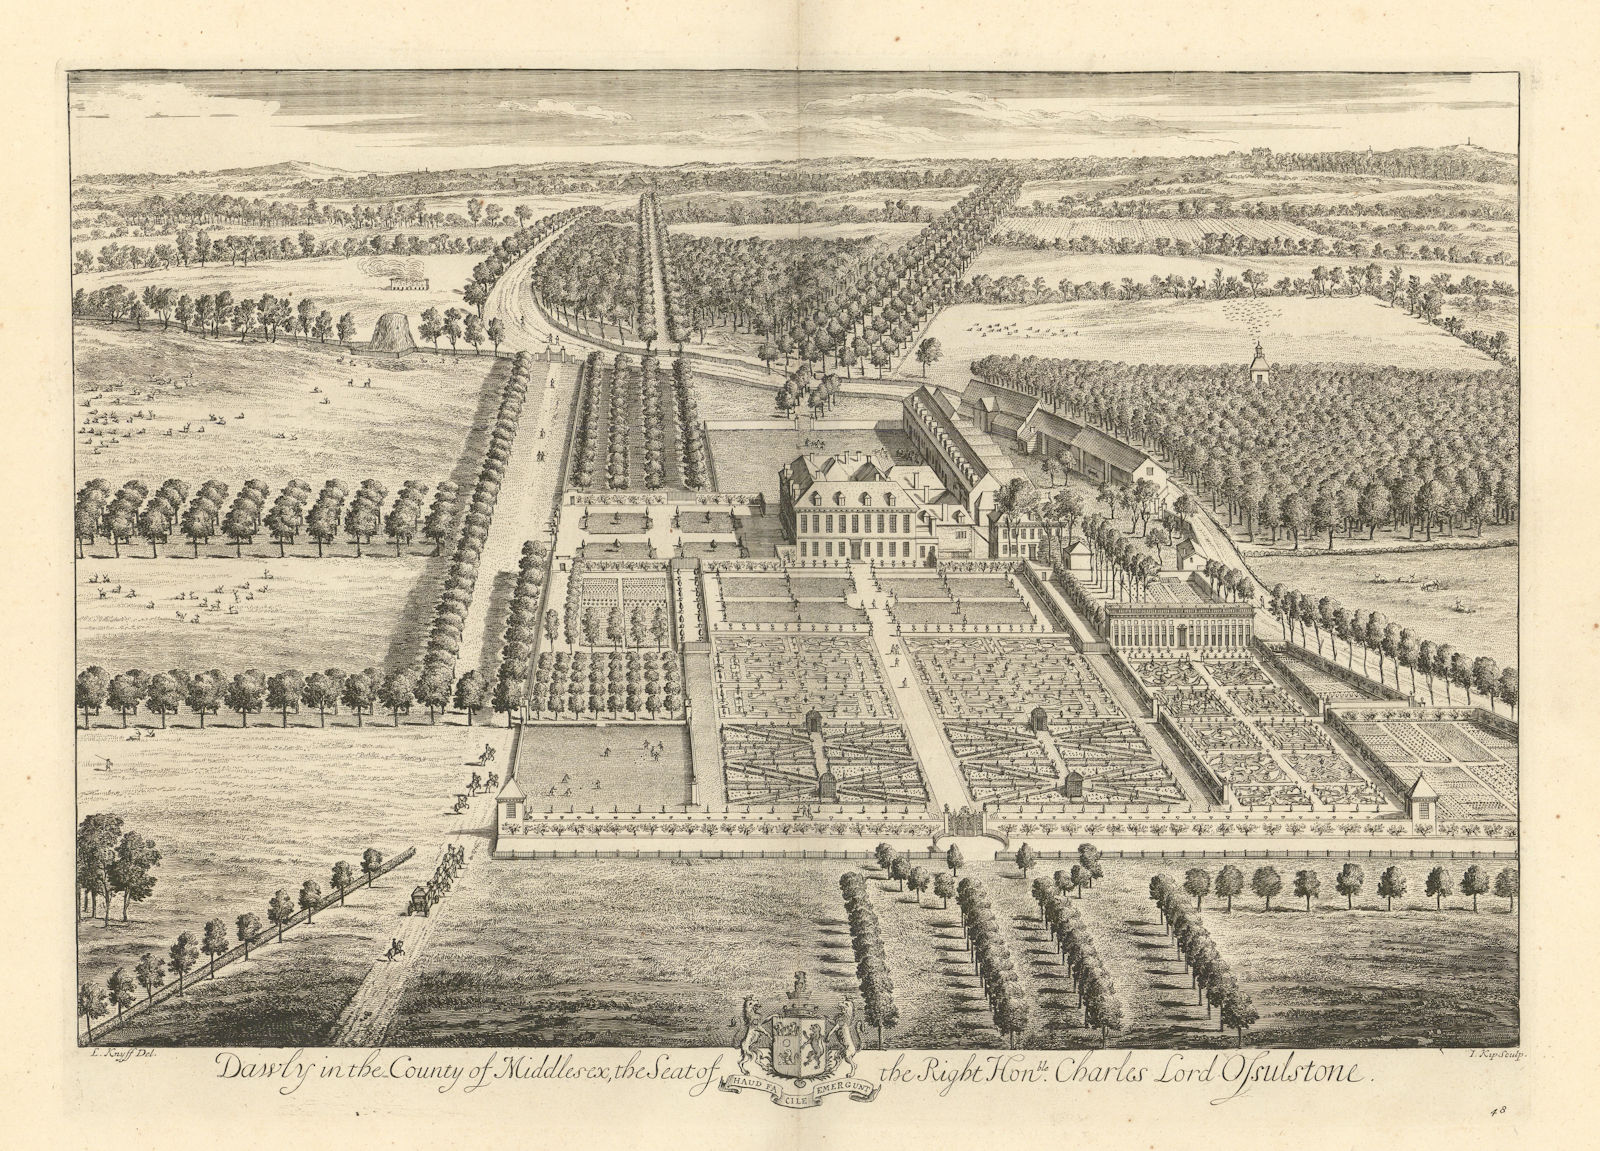 Dawley House, Hayes by Kip & Knyff. "Dawly in the County of Middlesex" 1709